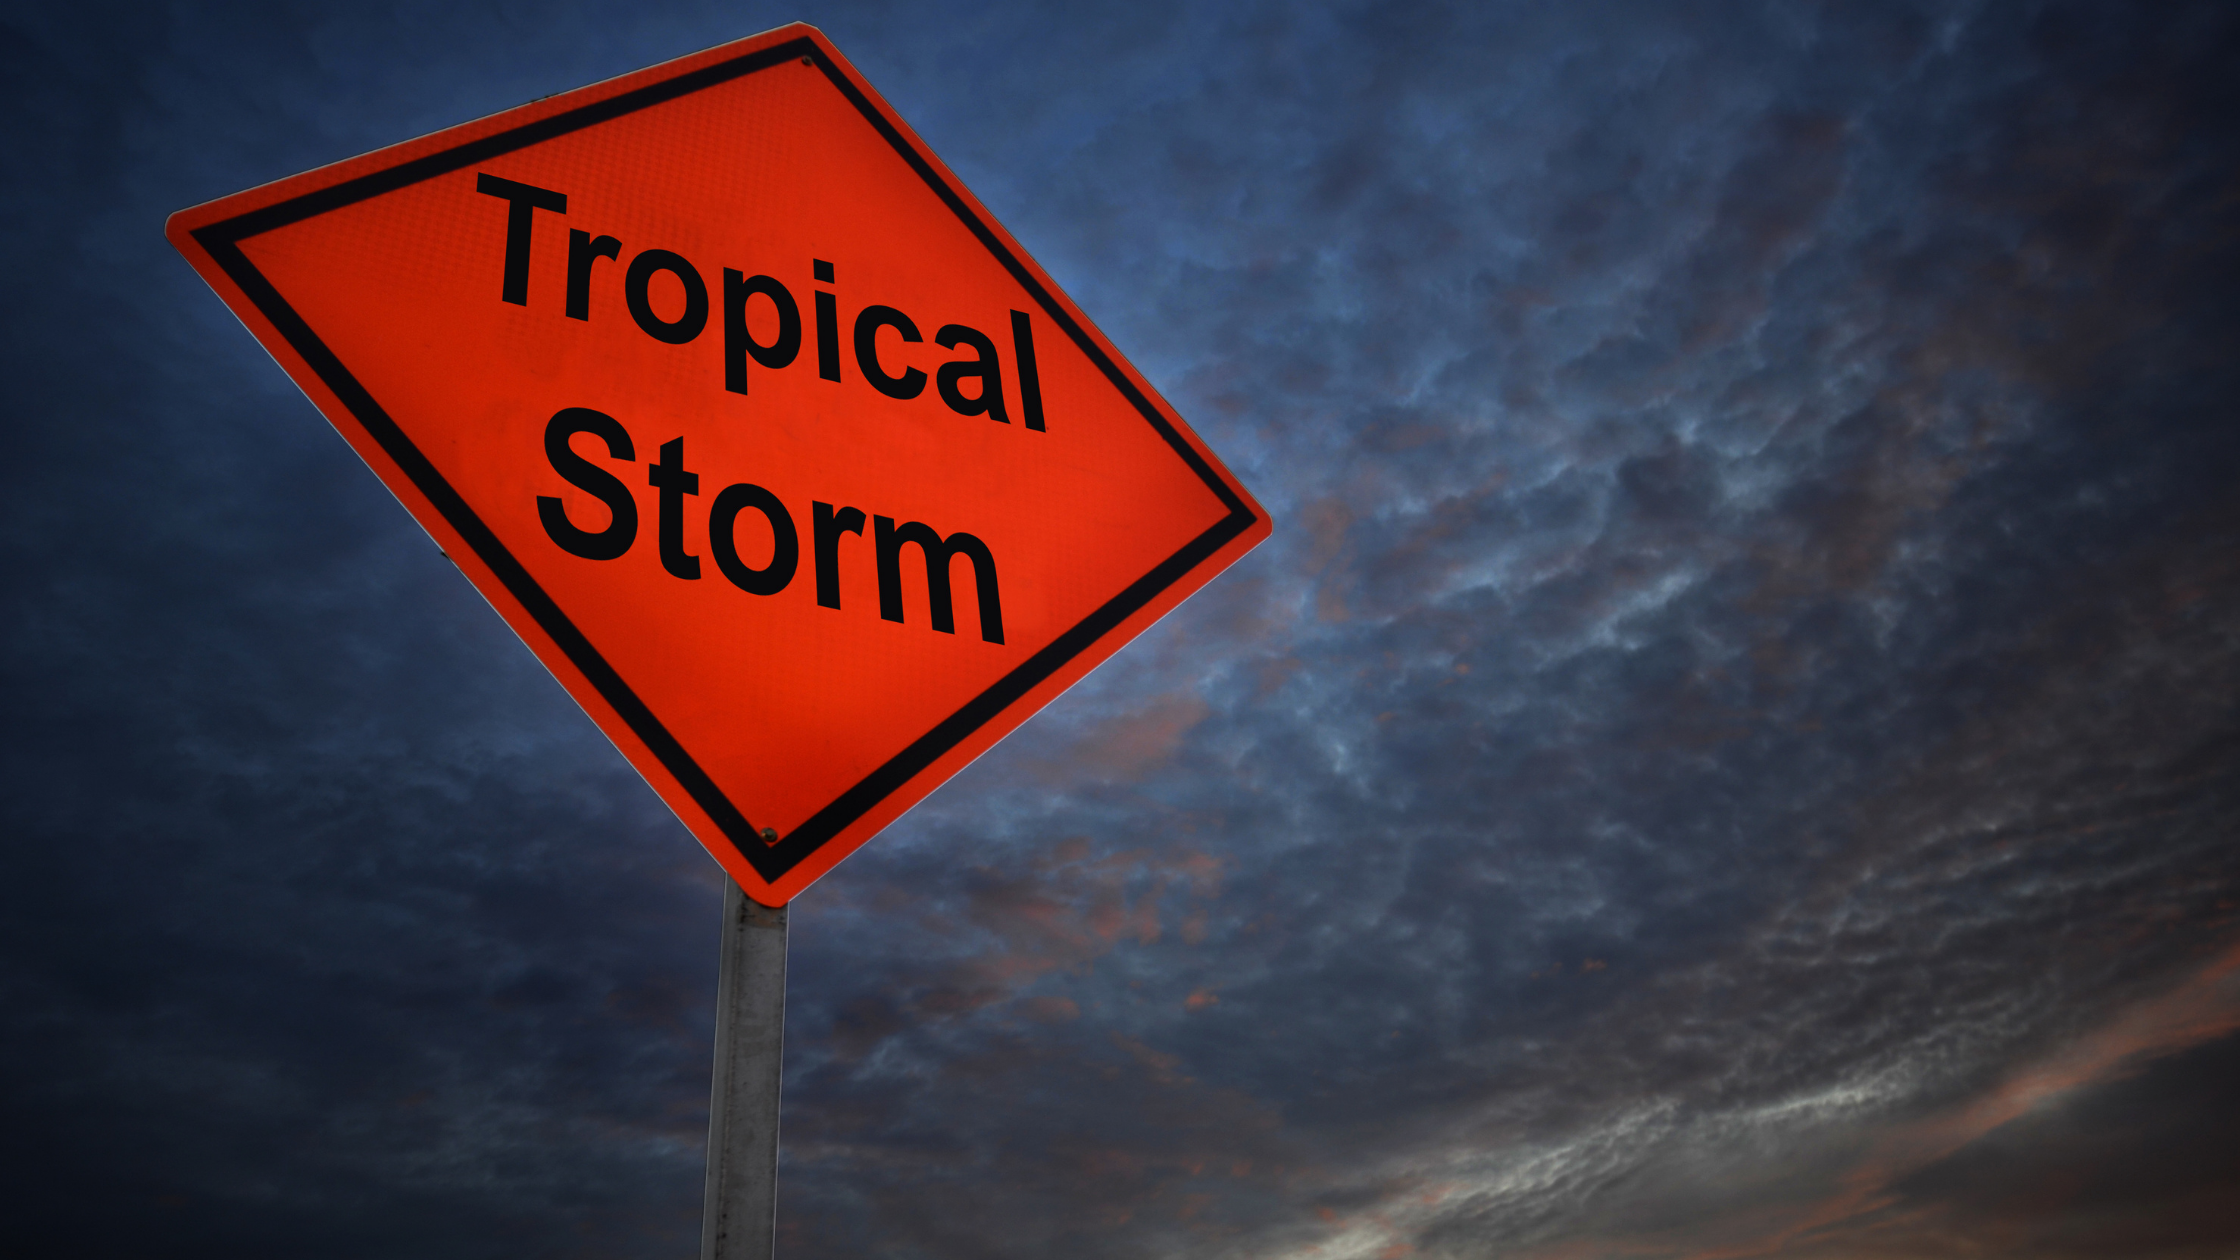 Tips for Preparing Your Home and HVAC System for Tropical Storm Nicholas